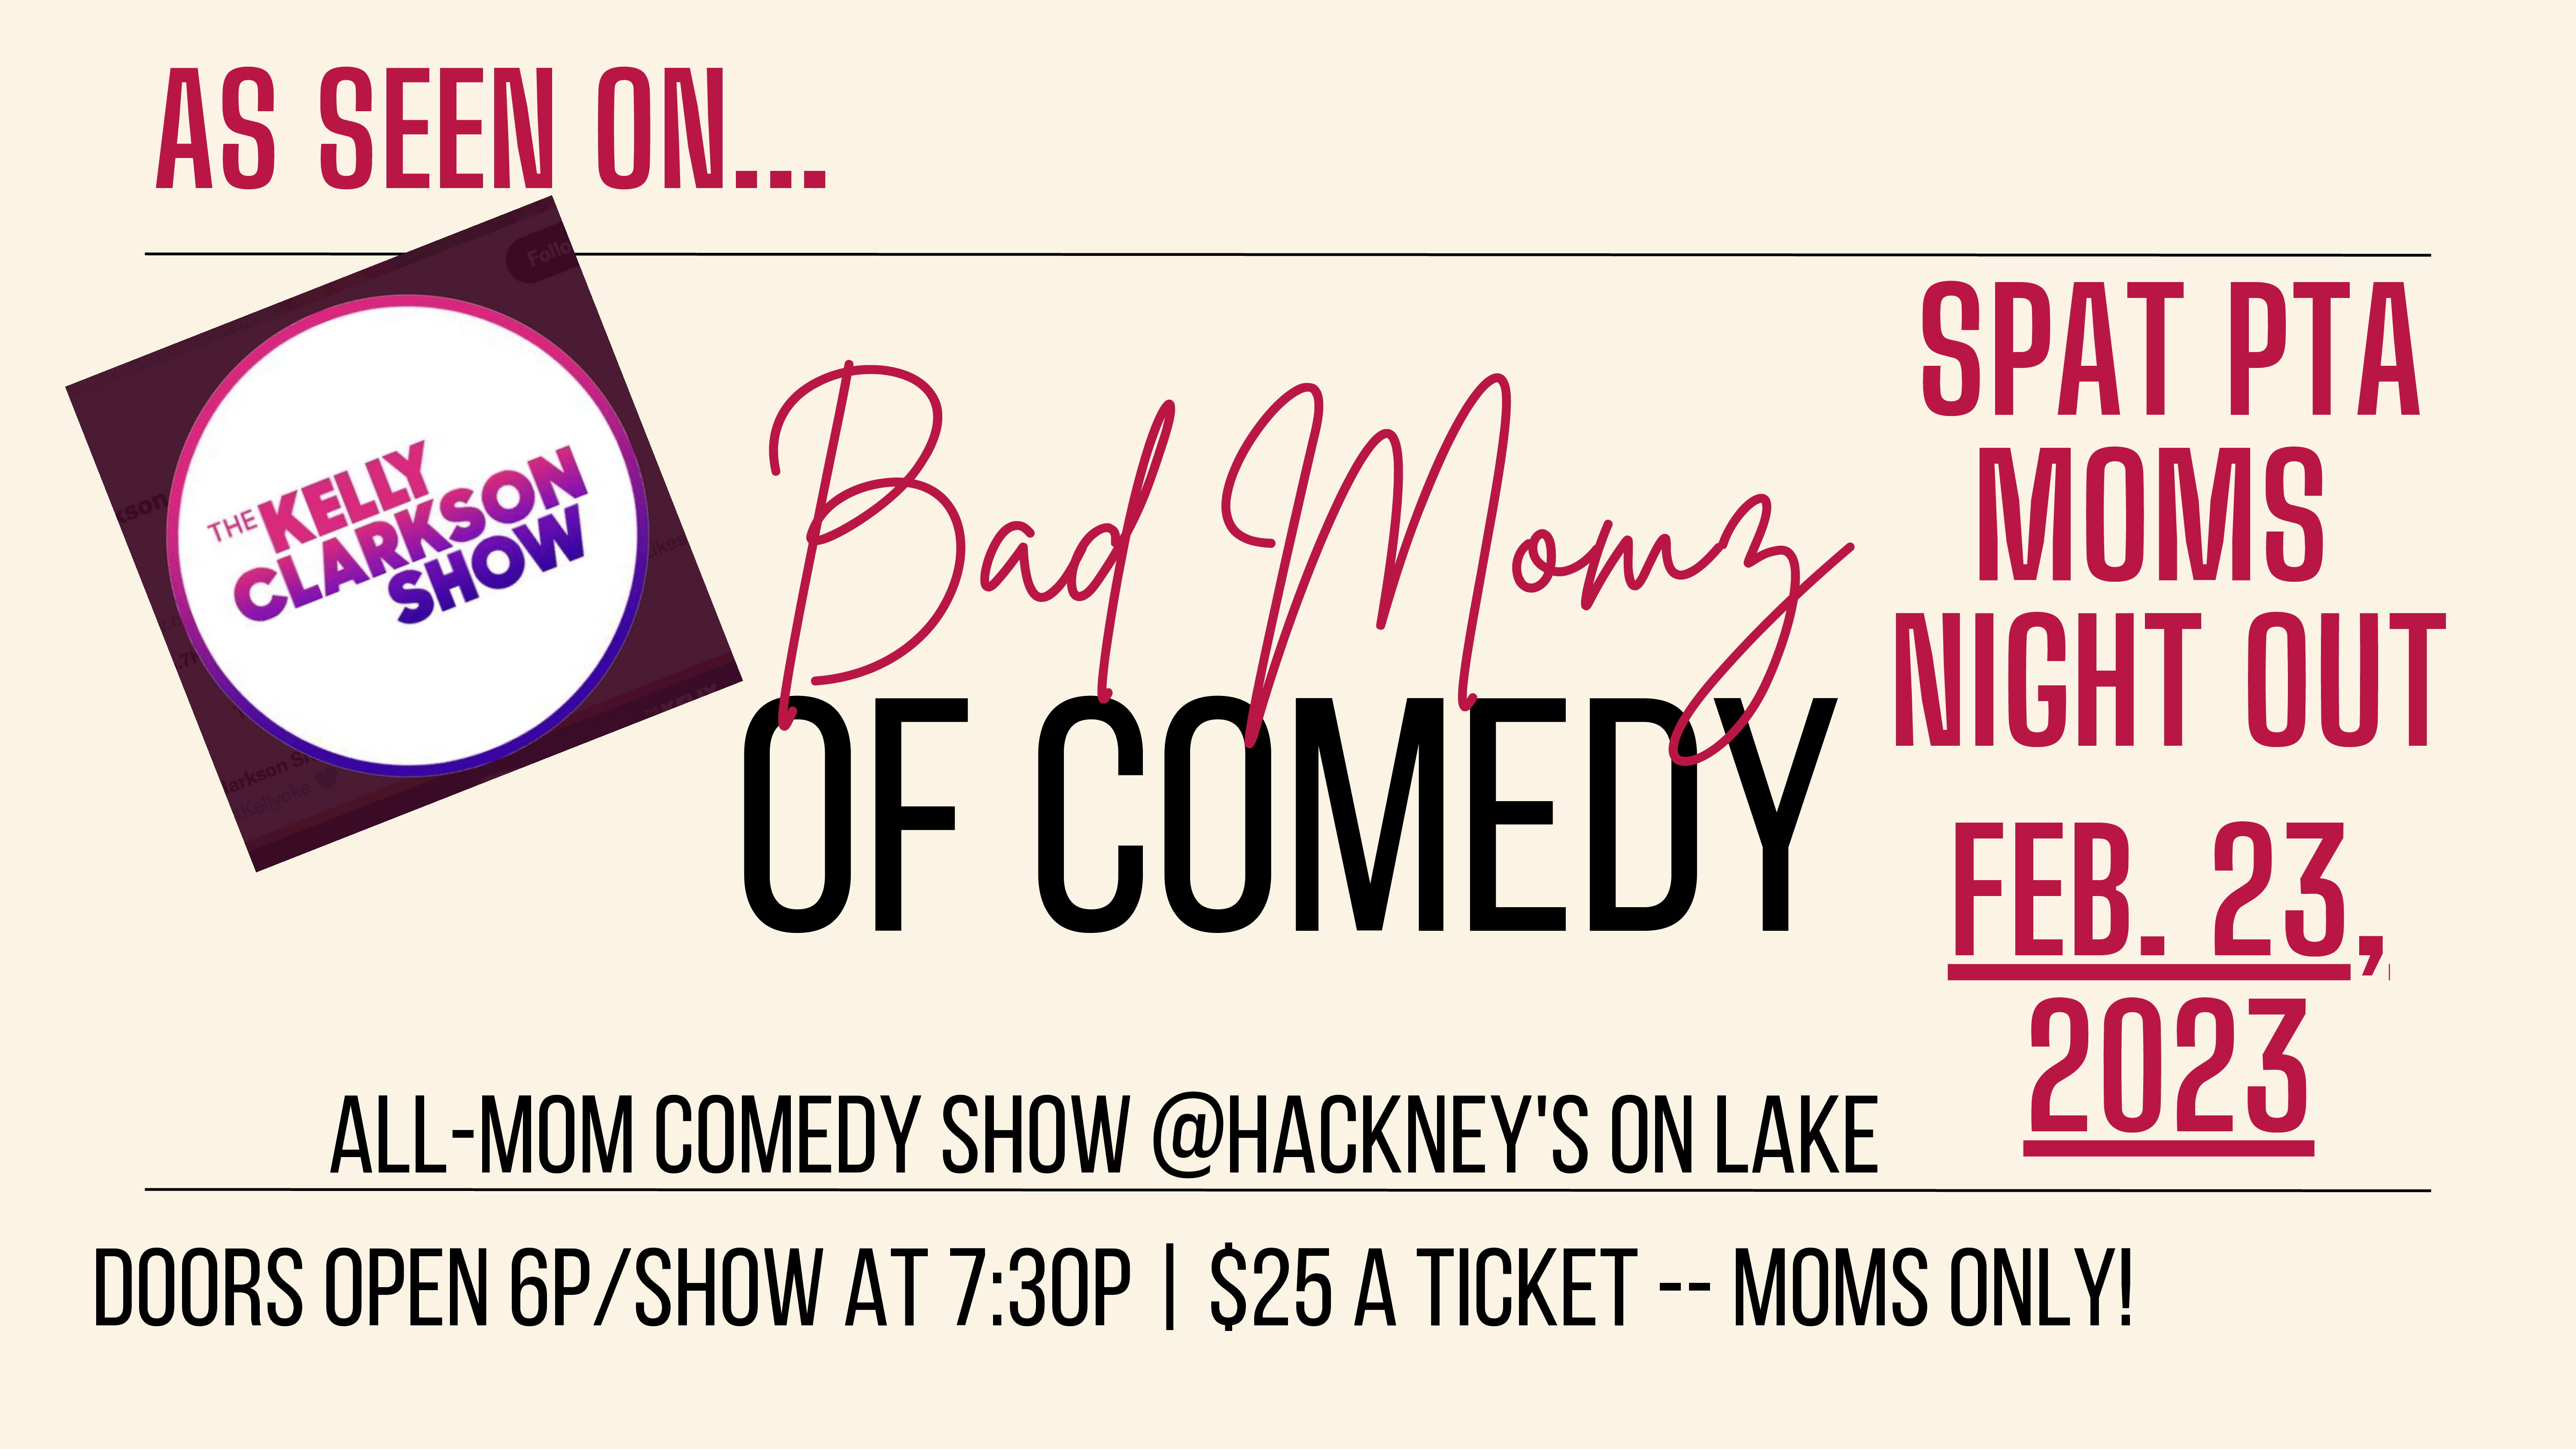 Bad Momz of Comedy Event